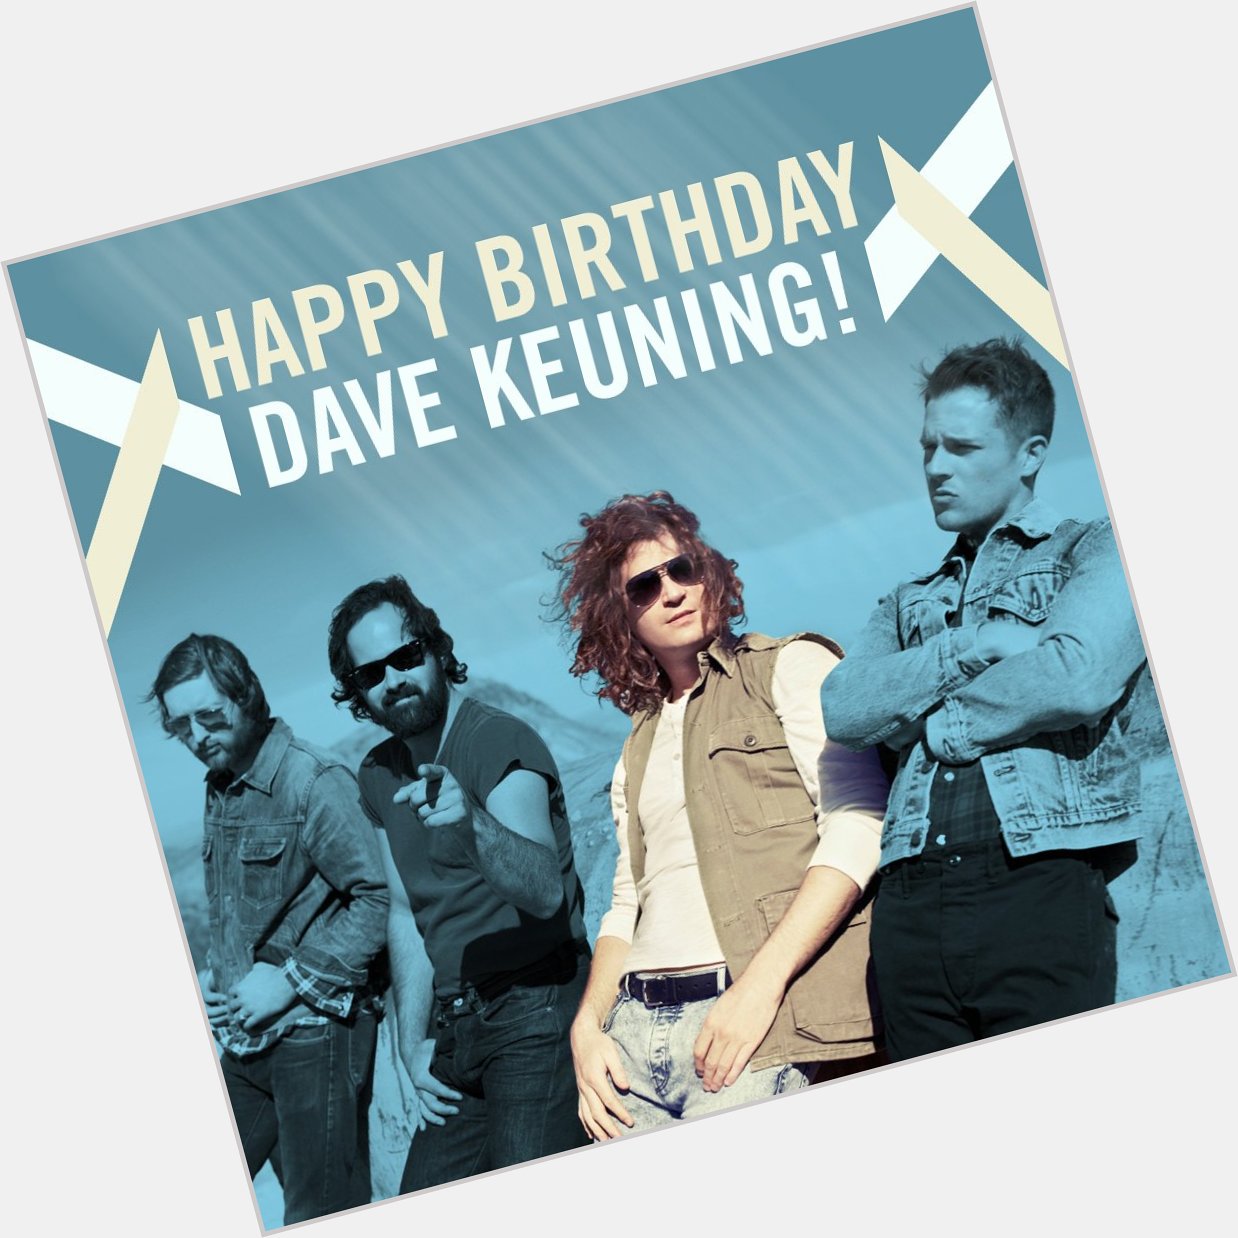 Somebody told me, it was your birthday. Happy birthday to Dave Keuning of 